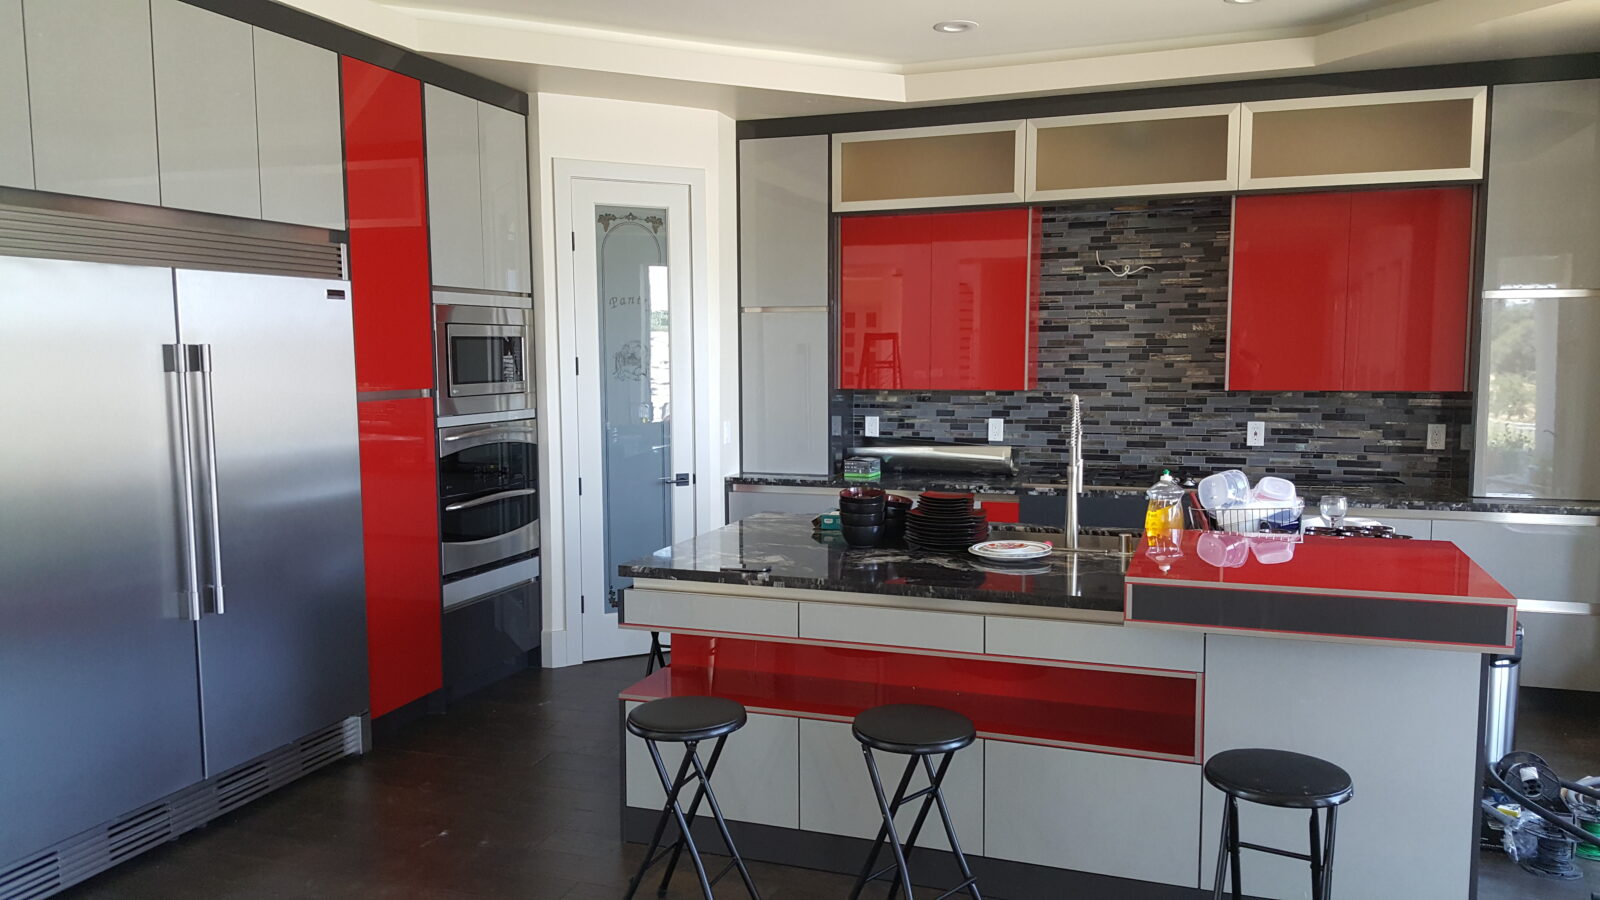 High gloss lux material kitchen. Red Kitchen. built-in appliances. Island sink space.